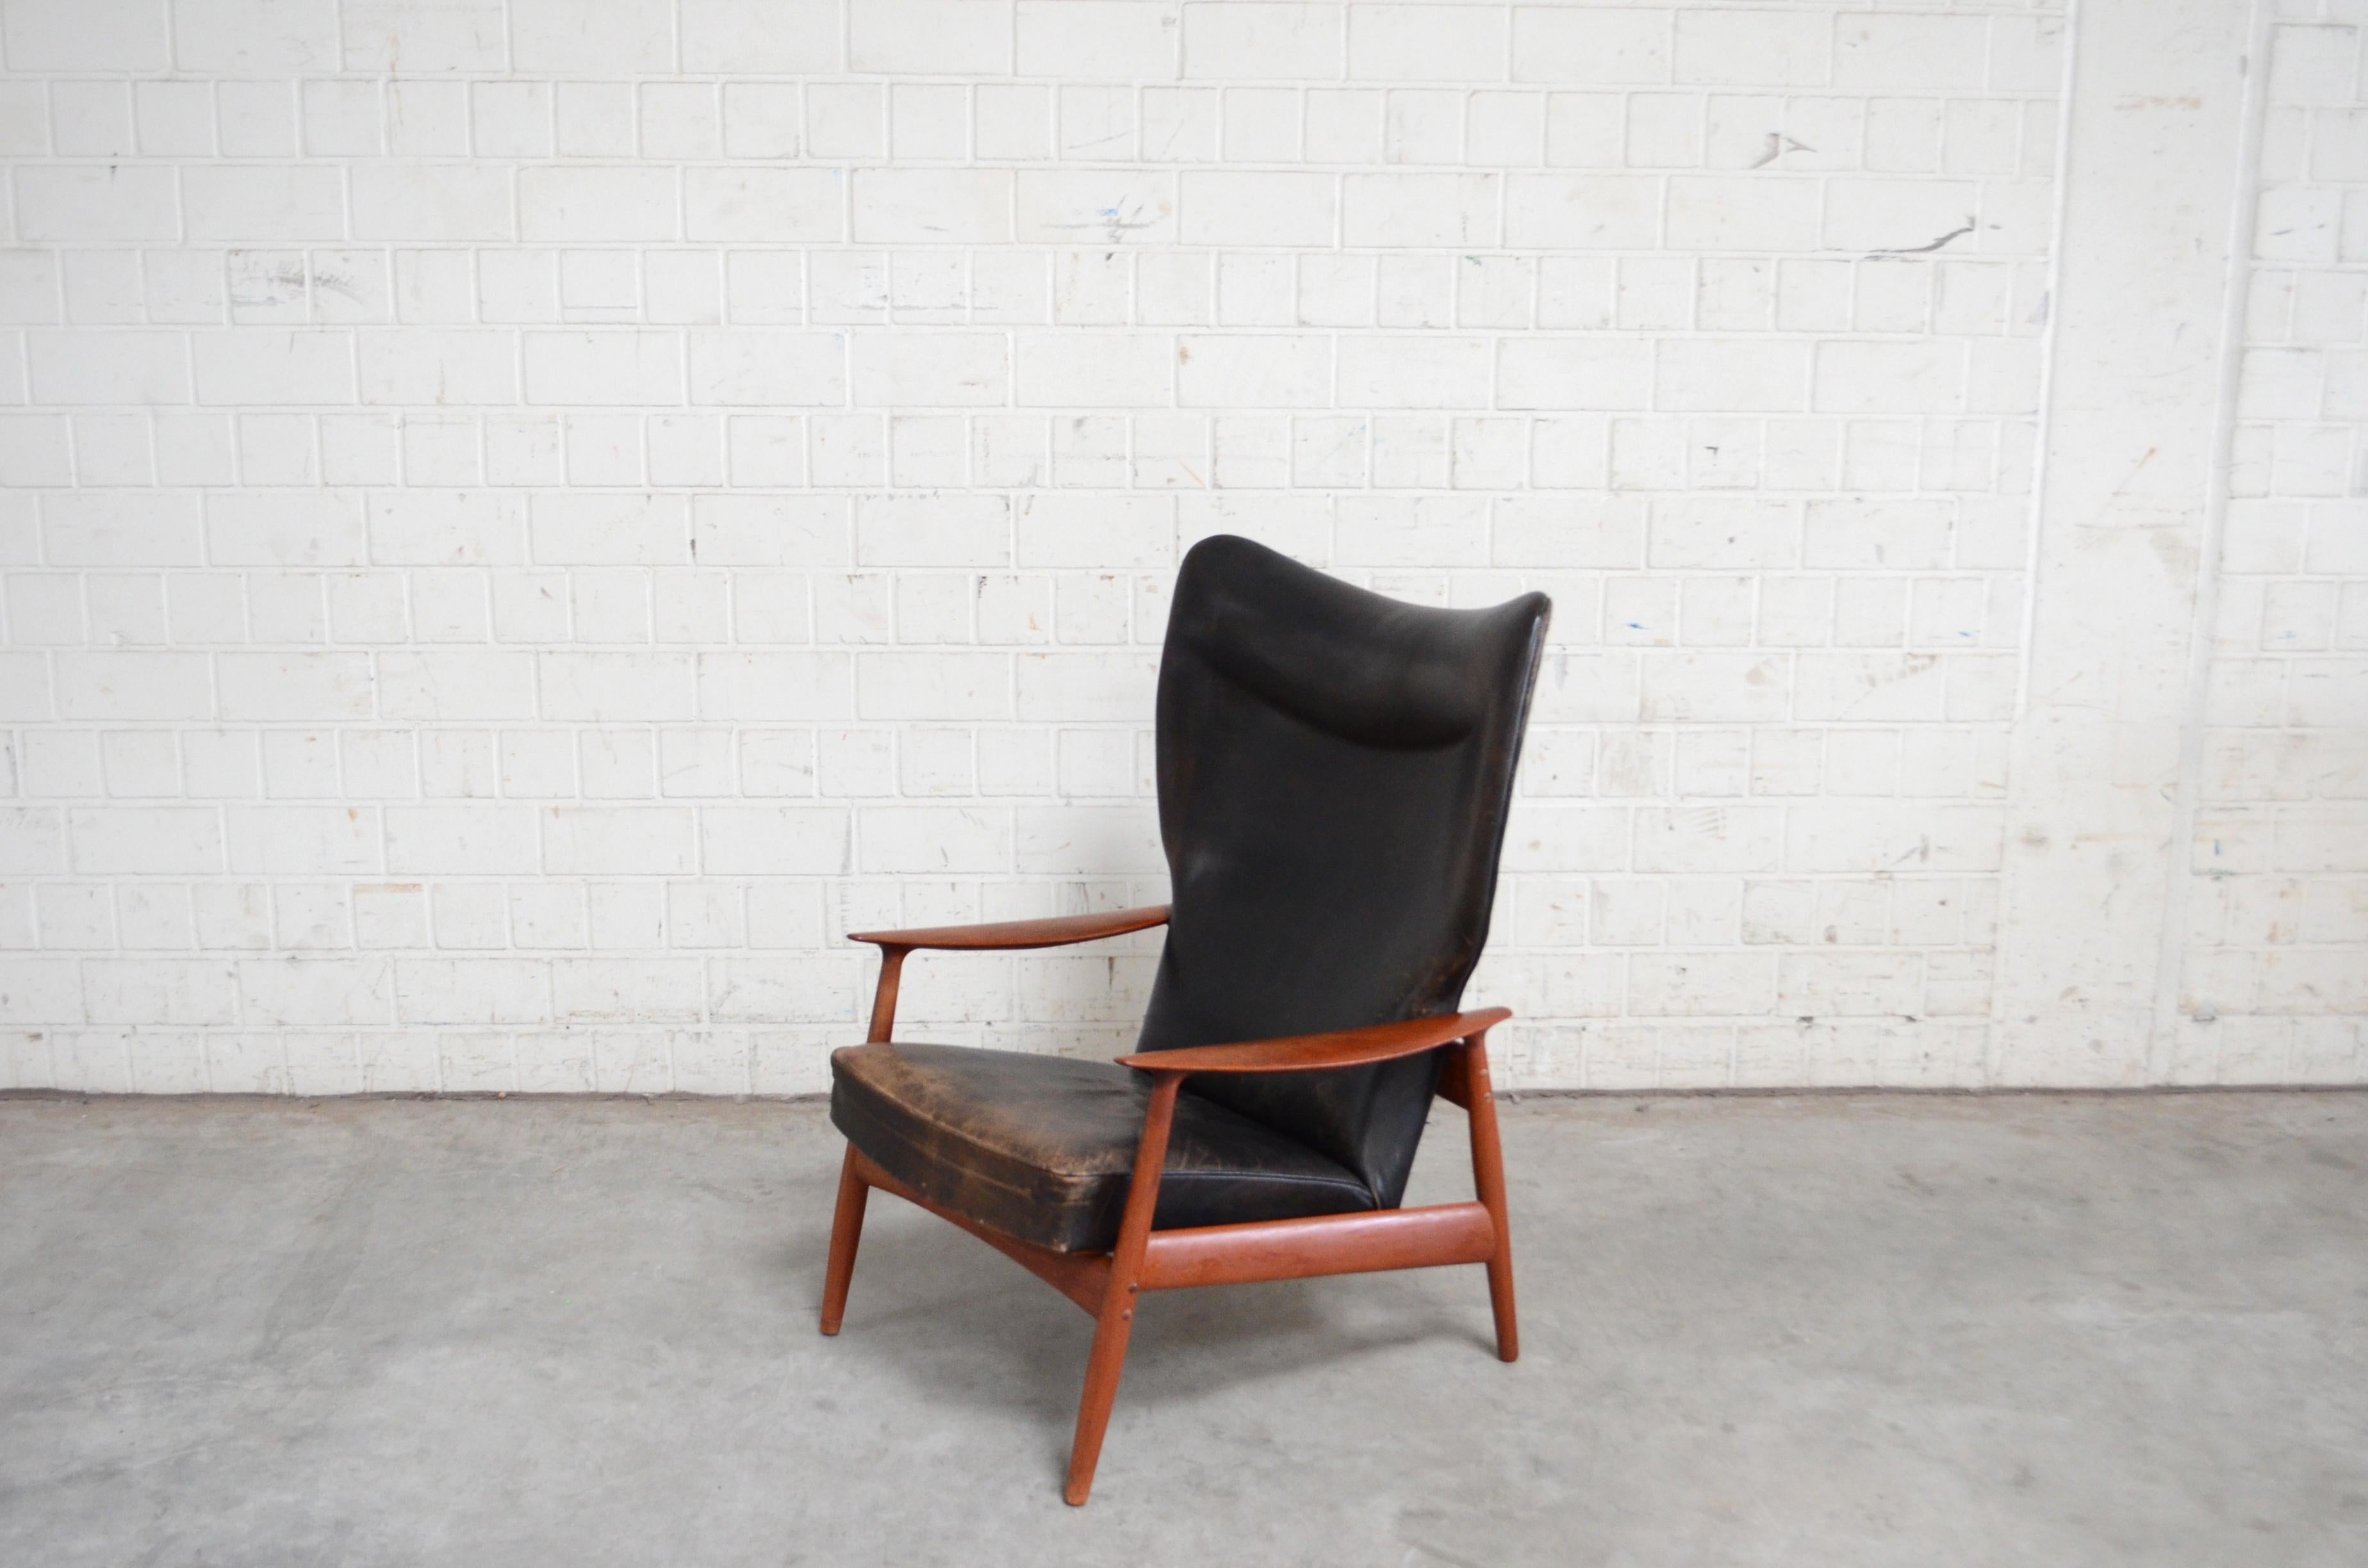 This beautiful wingback chair is designed by K. Rasmussen for Peter Wessel from Norway.
It has the original black leather with a fabulous patina.
The seat is adjustable for a lounge position.
The frame is made of teak. The wingback has on the